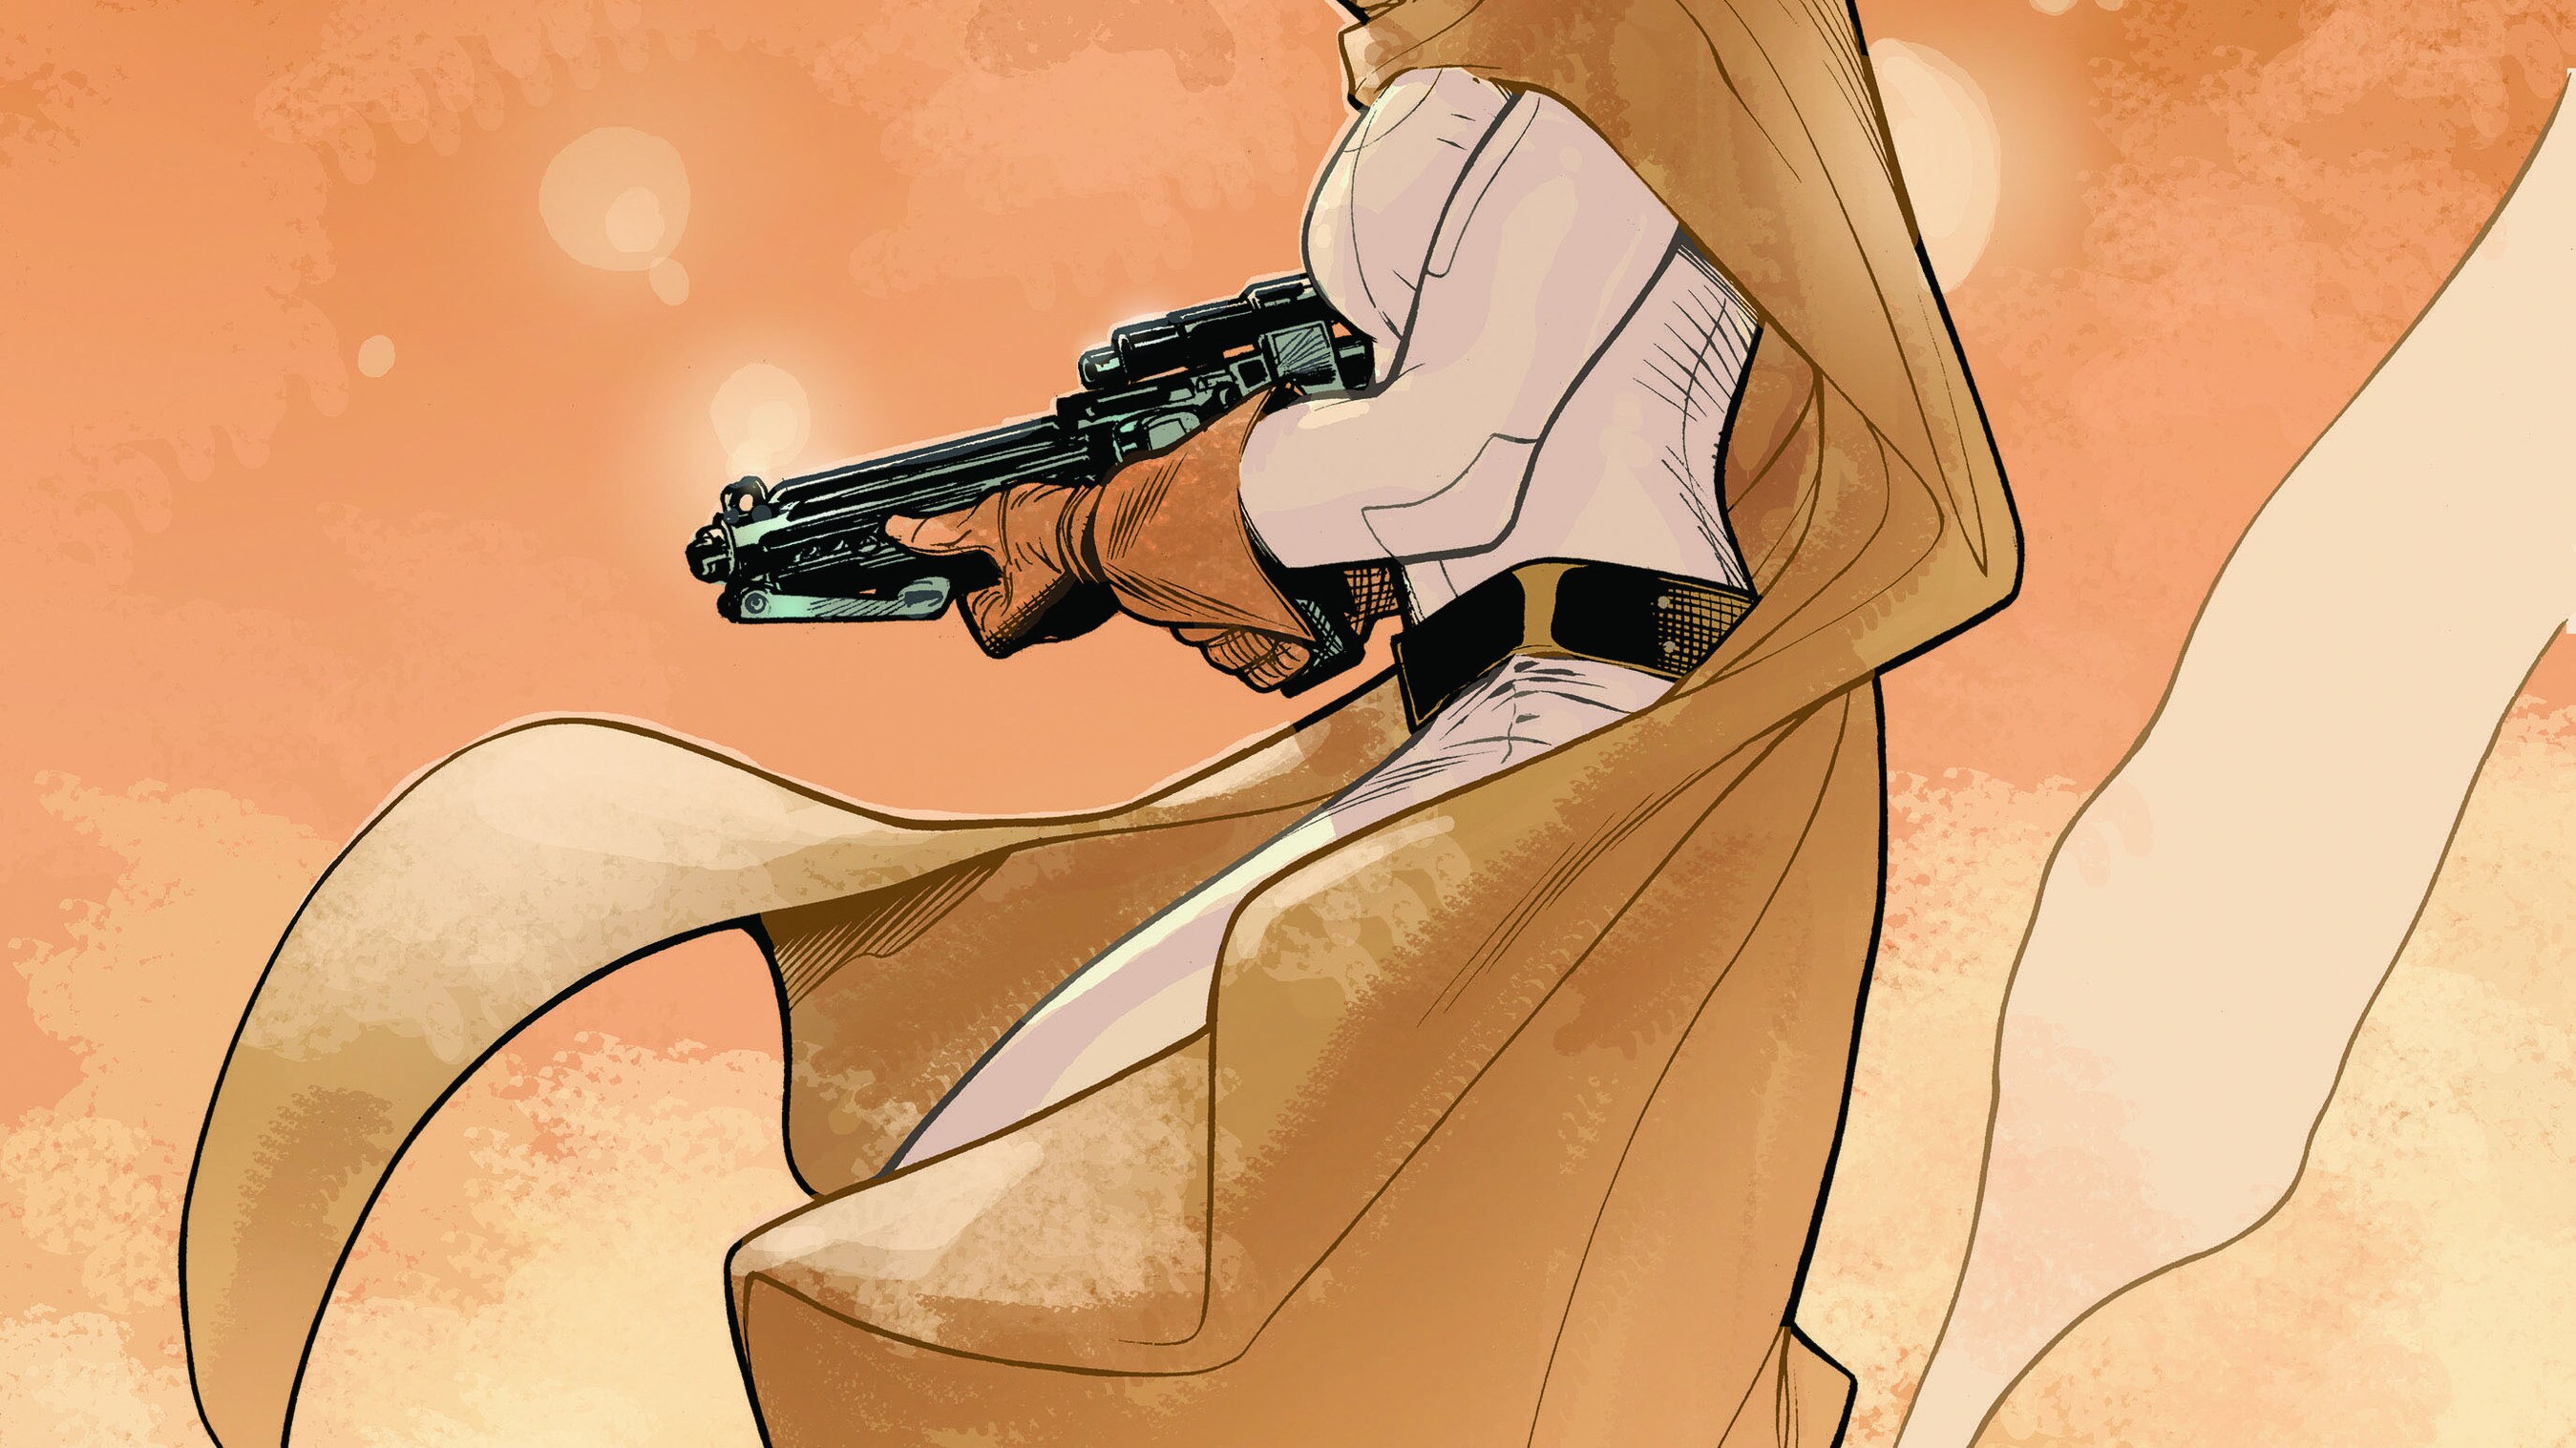 Rescue Missions Go Awry in Princess Leia #5